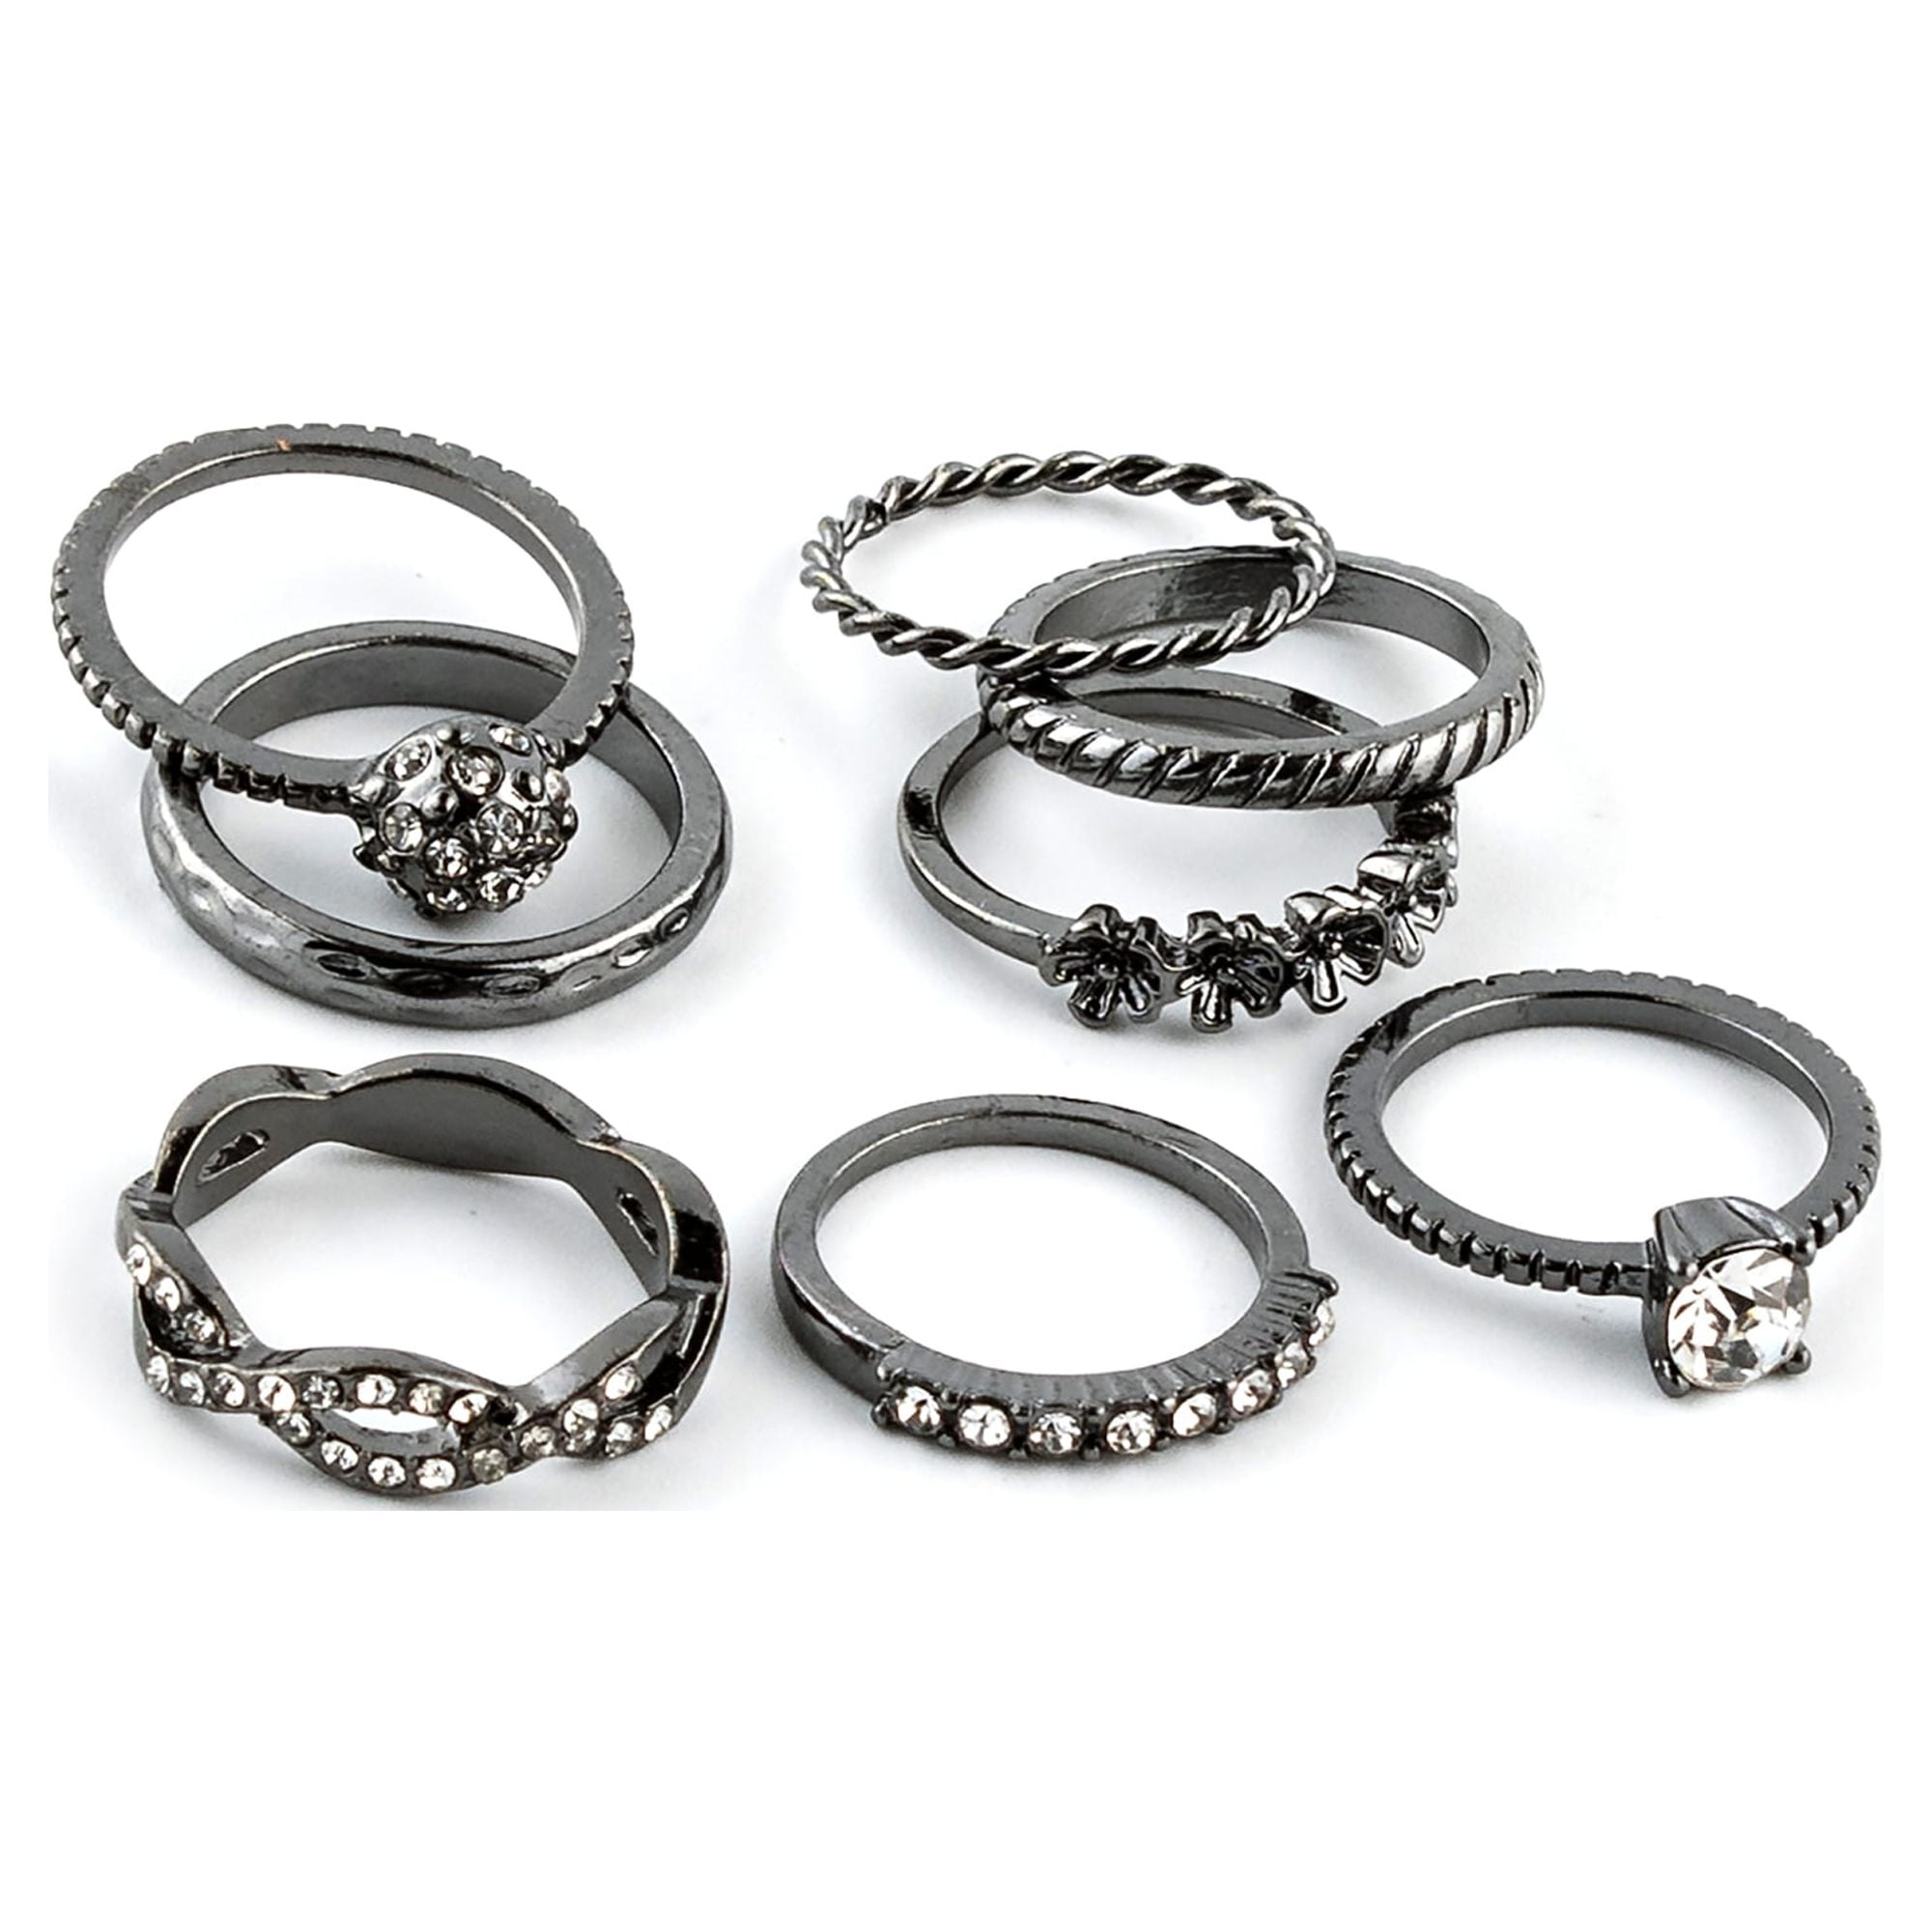 Gold Embellished Assorted Rings (8 Pack)